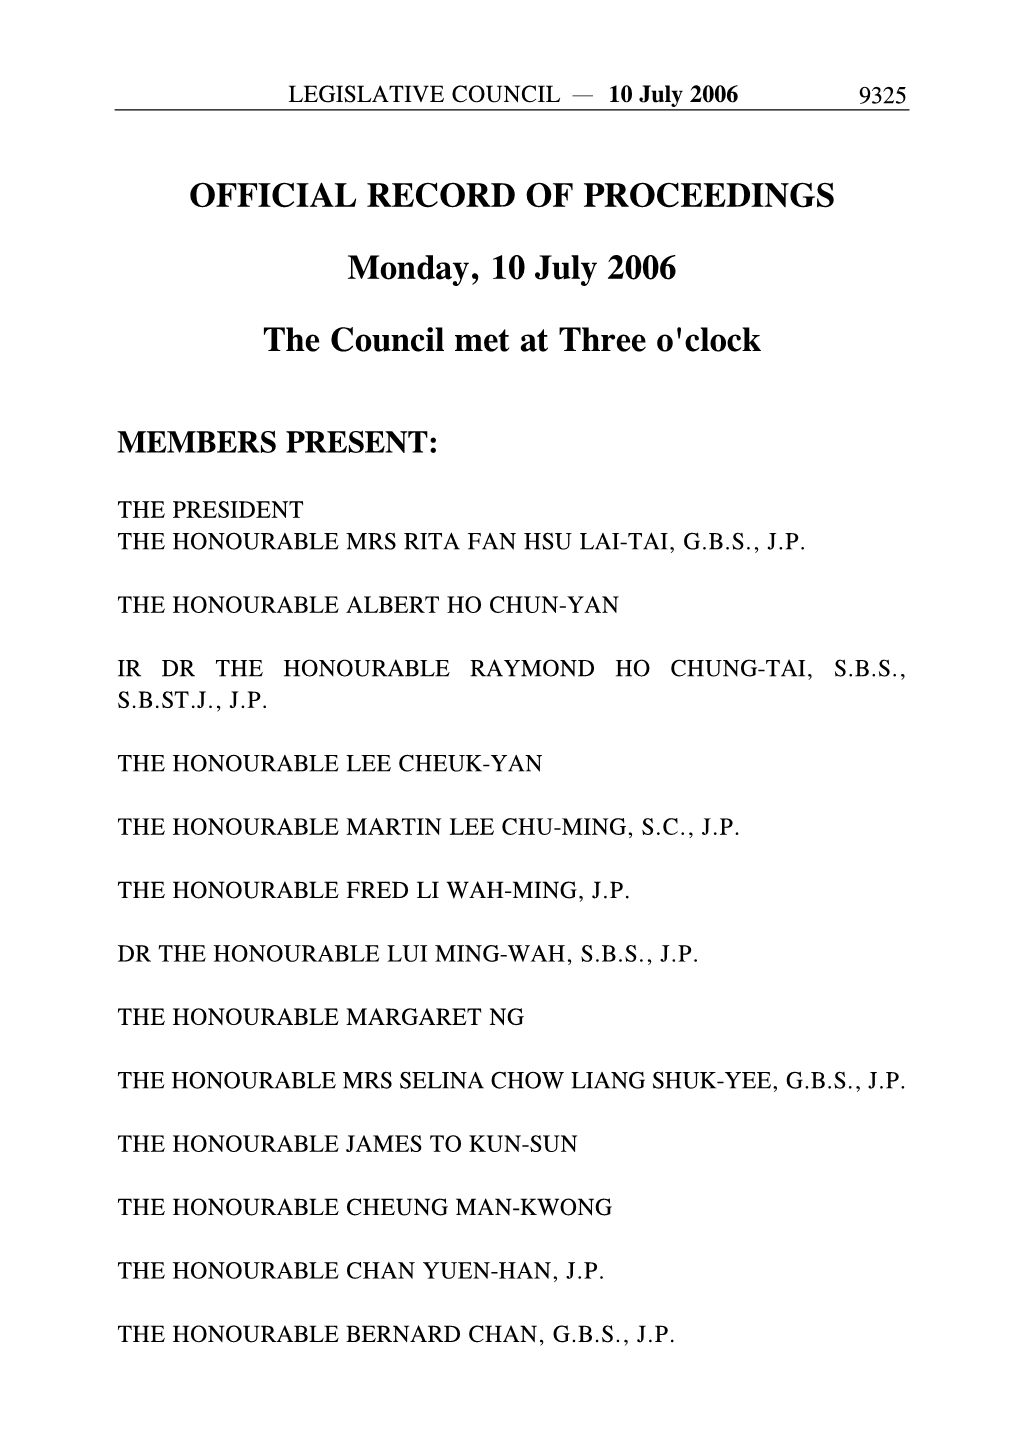 OFFICIAL RECORD of PROCEEDINGS Monday, 10 July